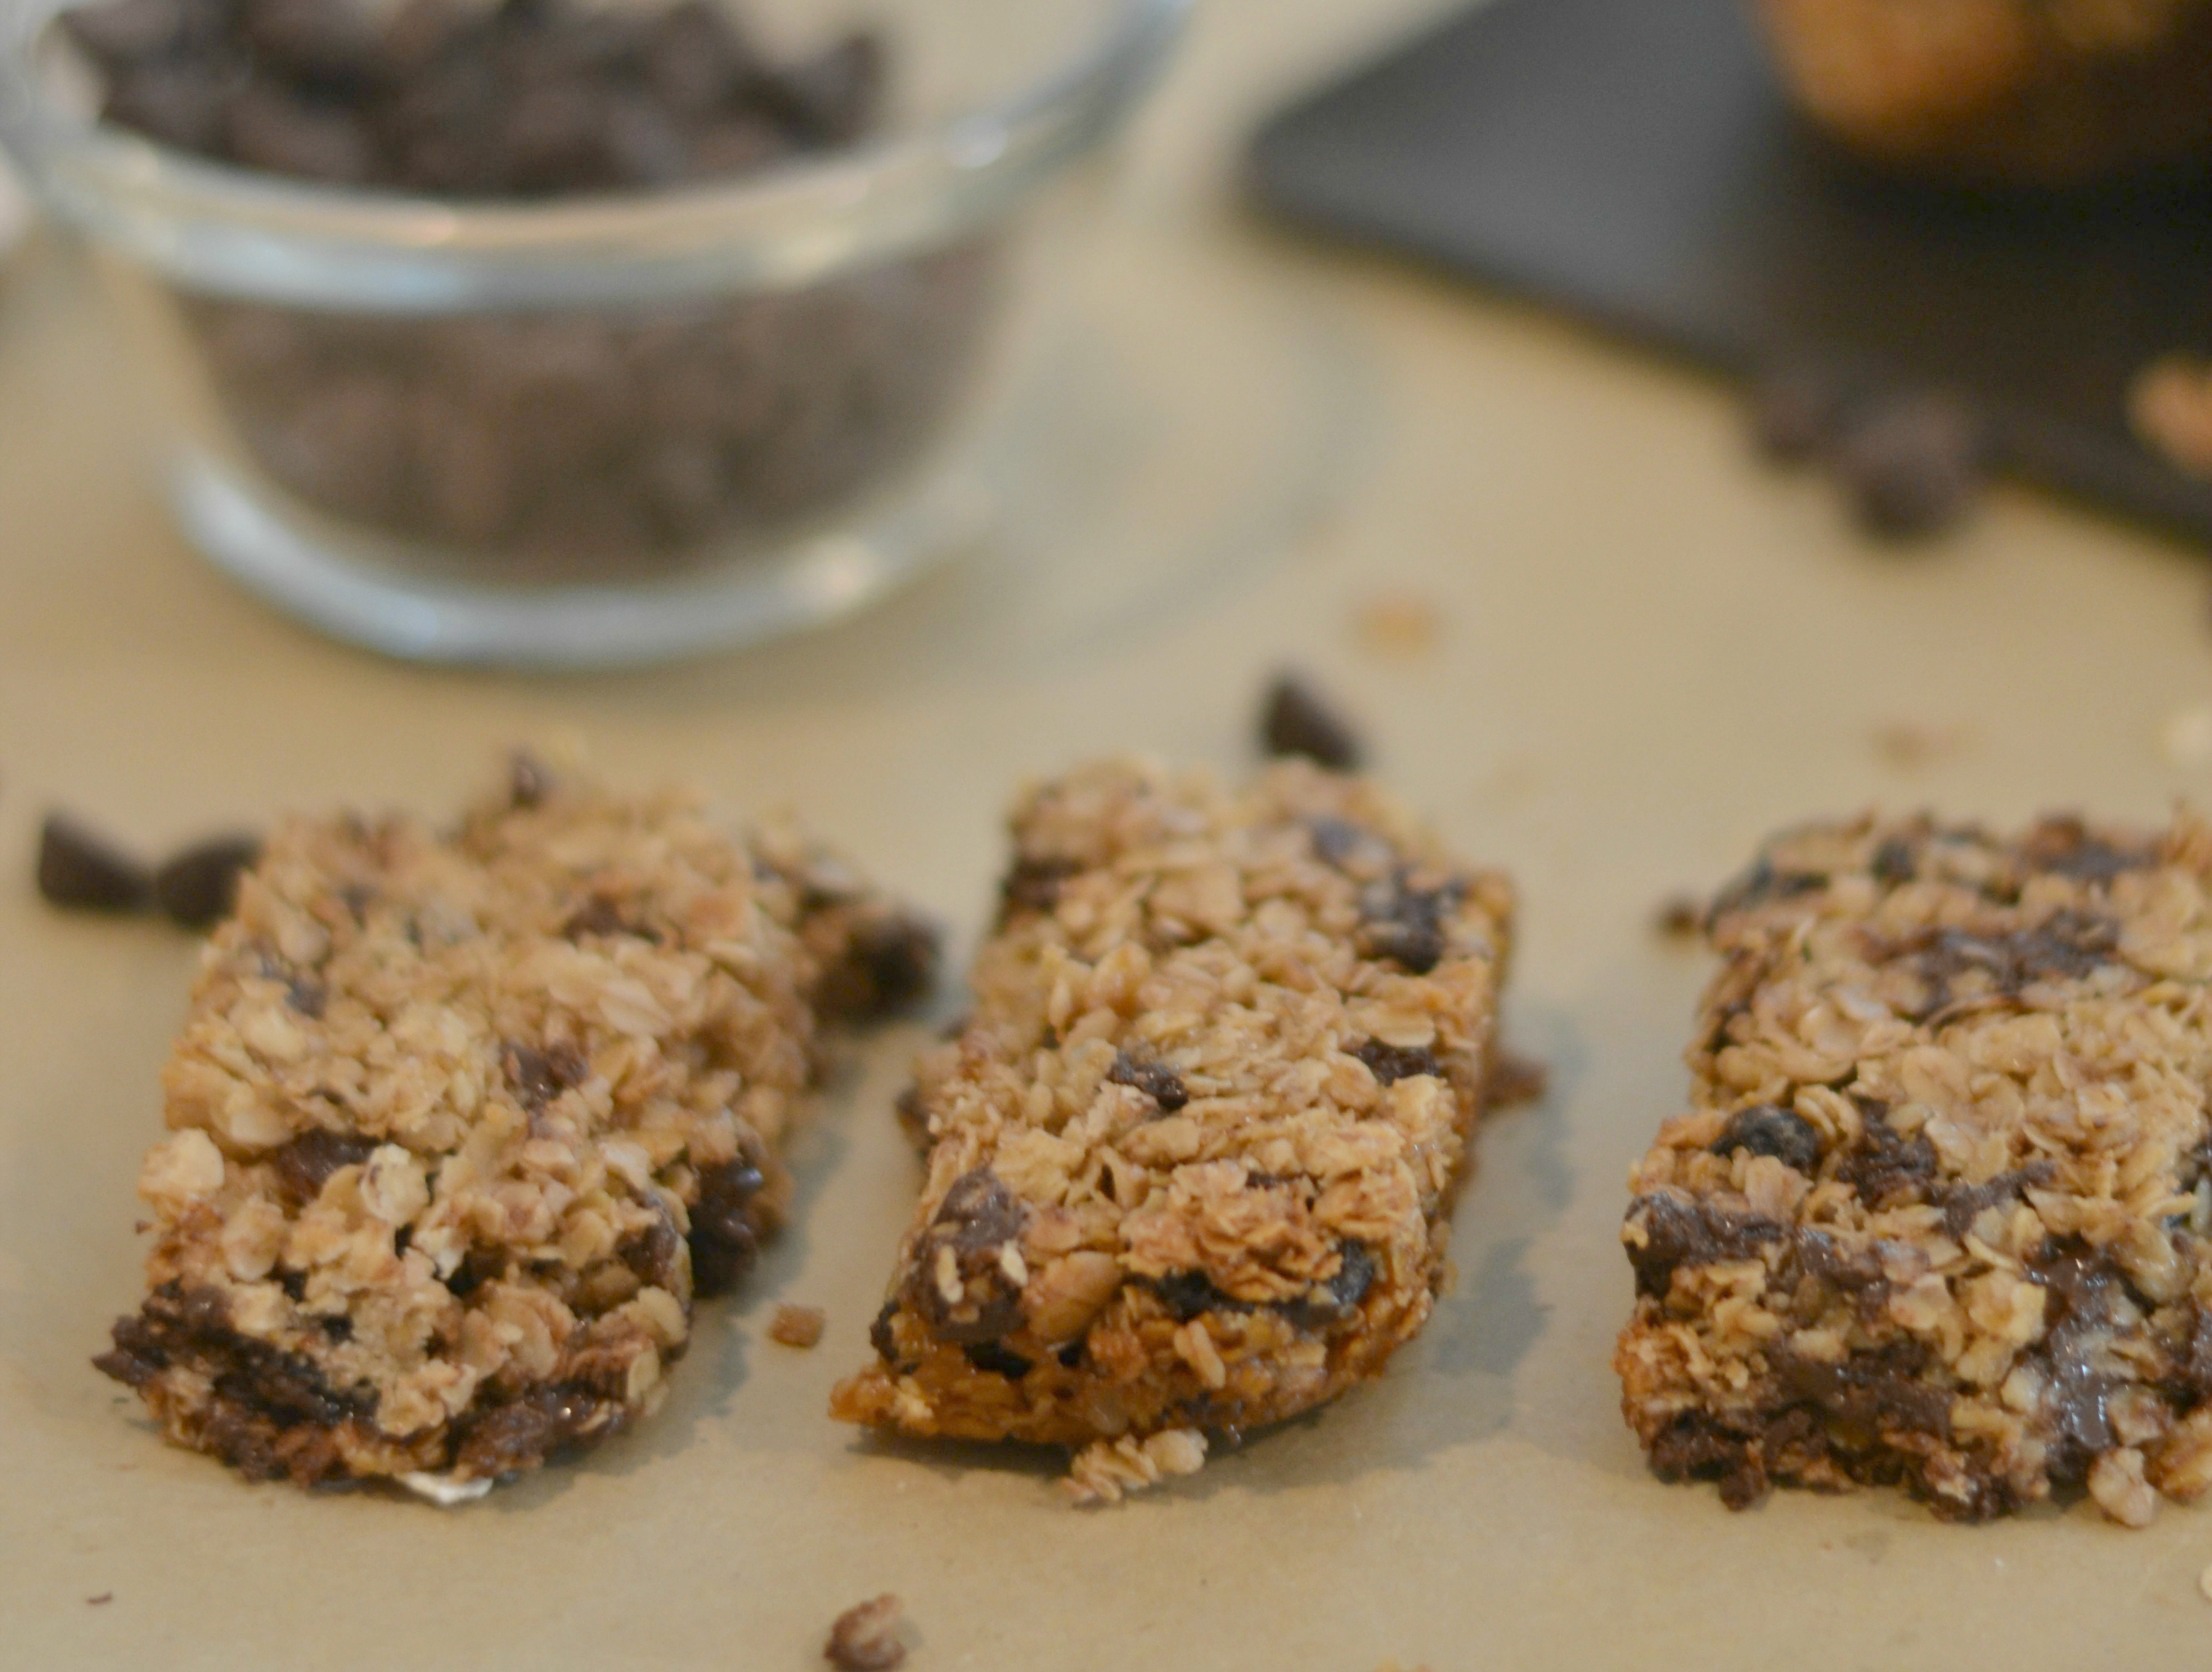 Delicious granola bar recipe and easy to make. These were a hit with my kids!